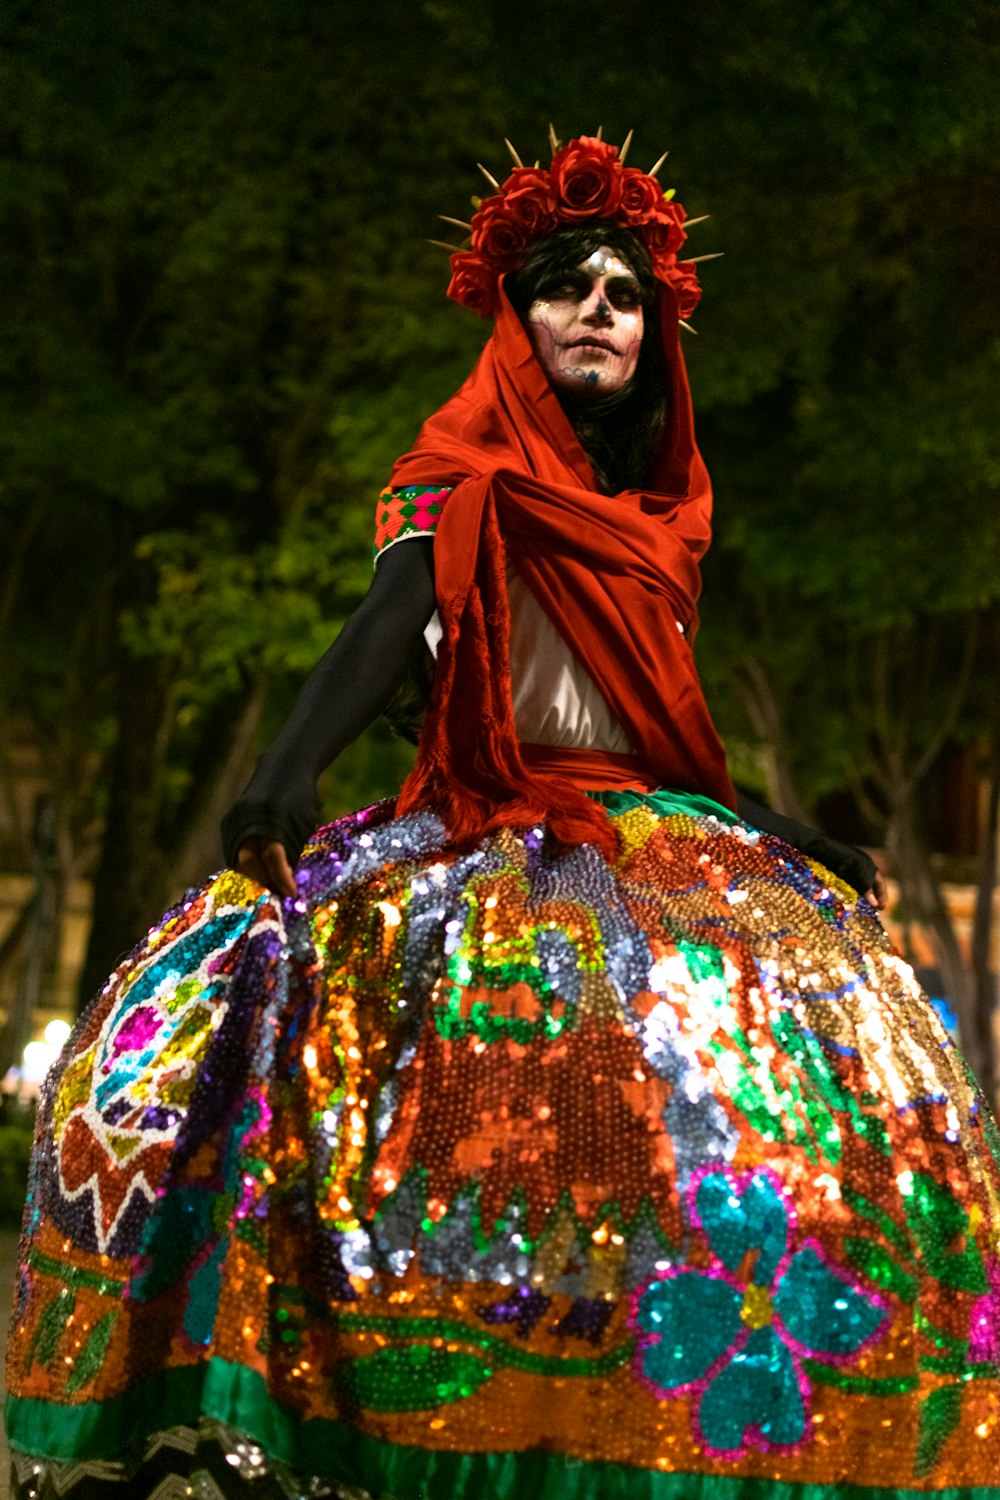 a woman in a costume sitting on top of a colorful object